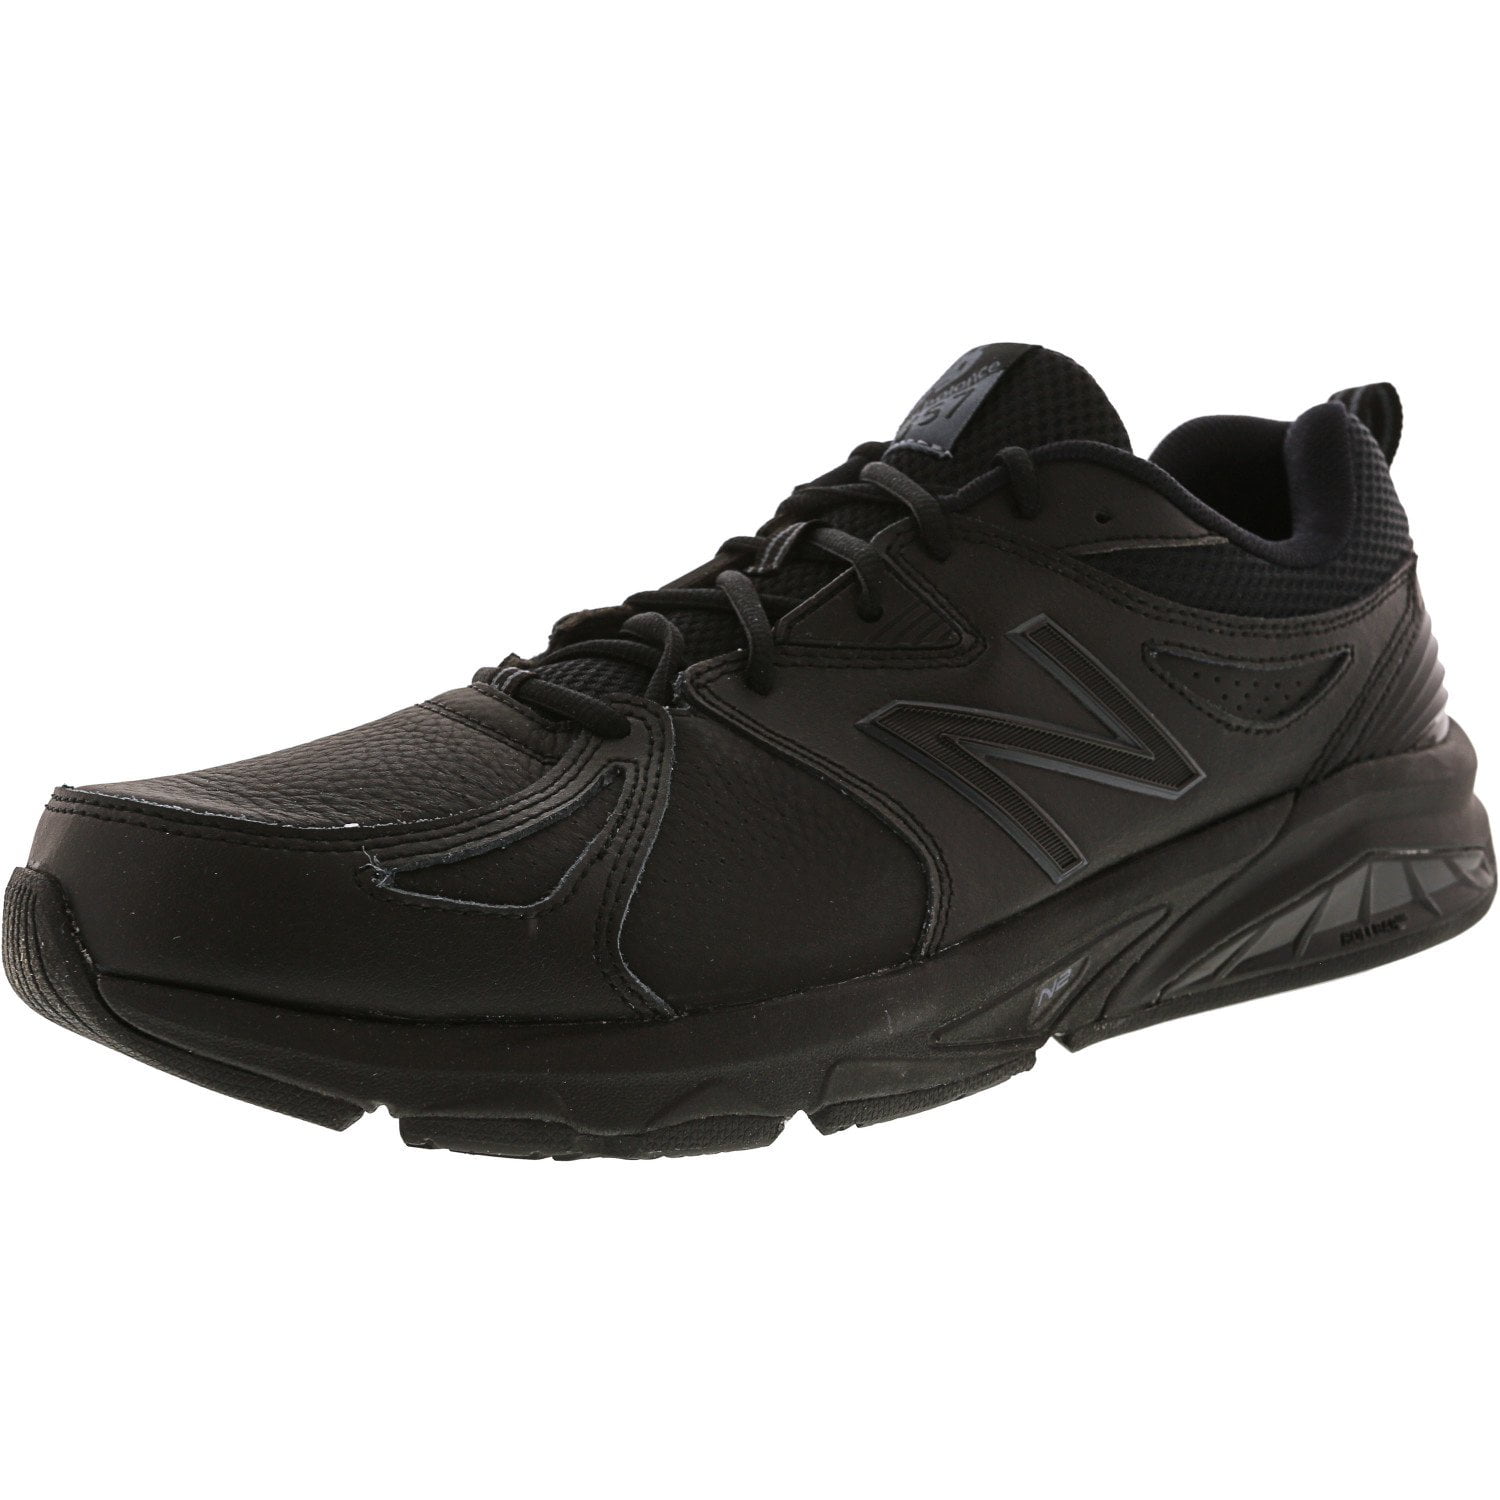 new balance 857 men shoe,Save up to 19%,www.ilcascinone.com